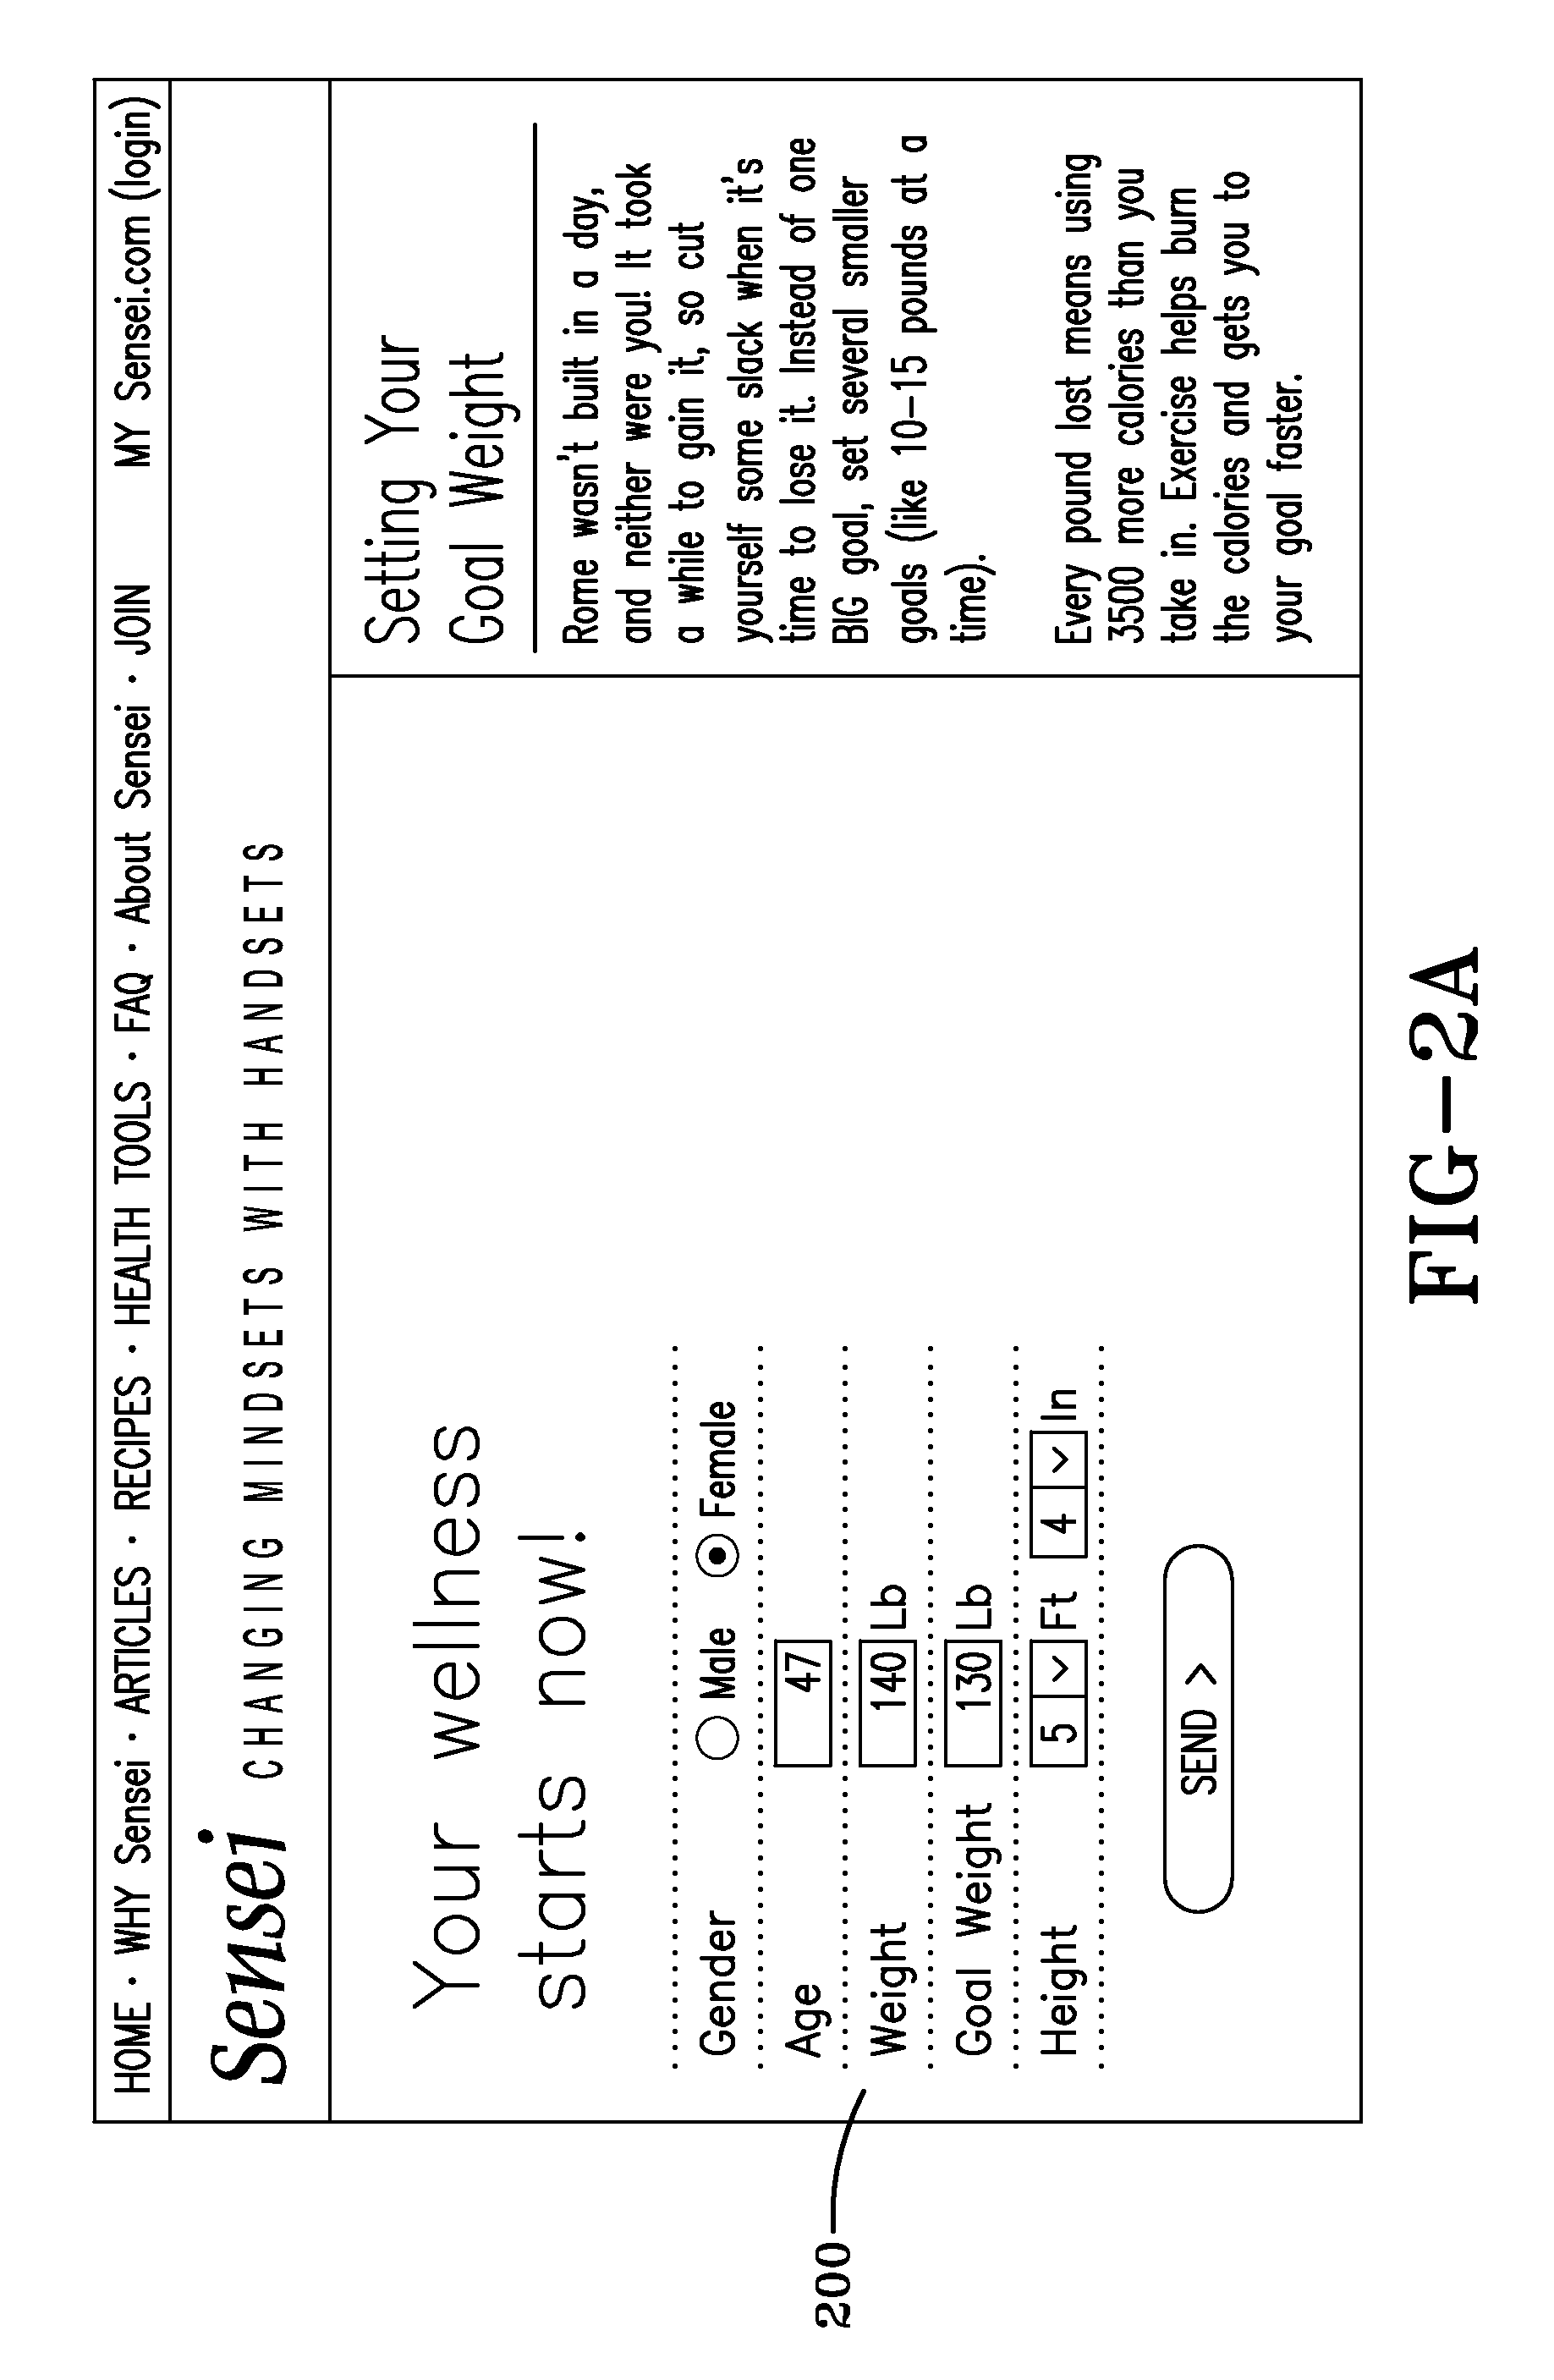 System and method for rewarding users for changes in health behaviors